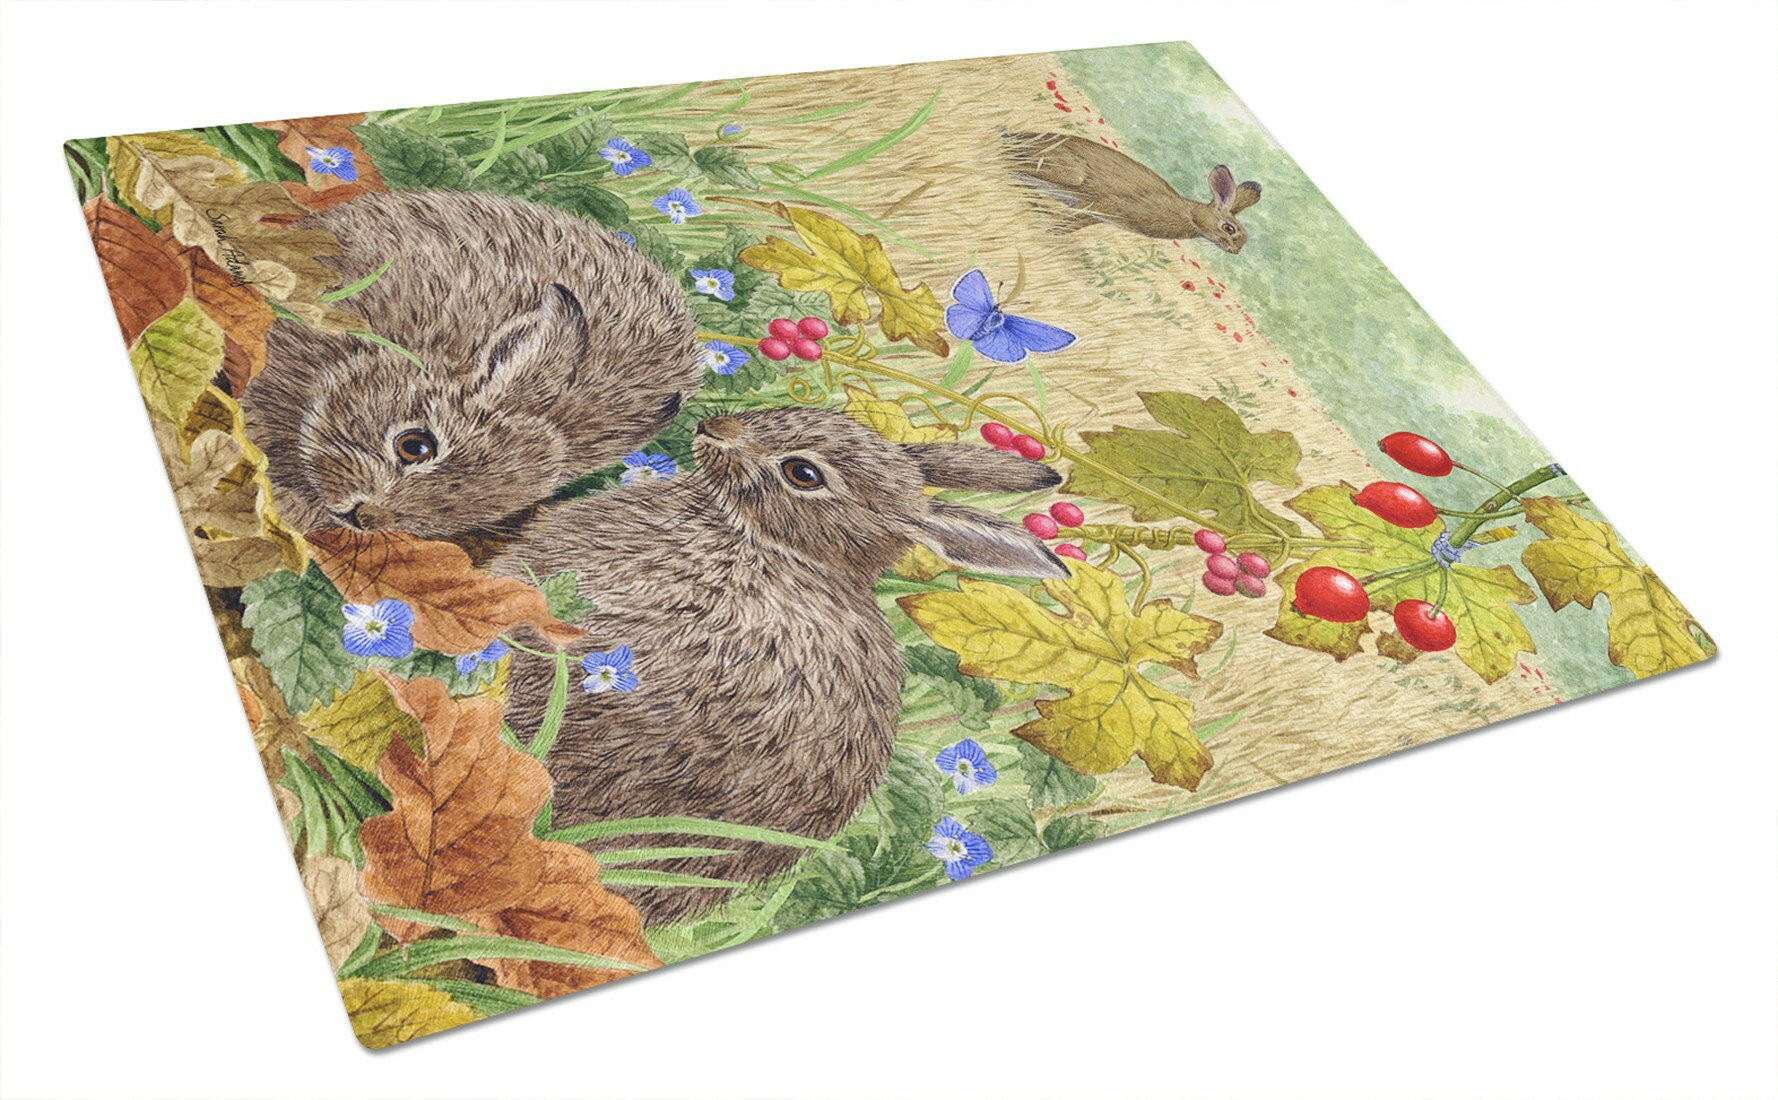 Leverets and Rabbit Glass Cutting Board Large ASA2140LCB by Caroline's Treasures